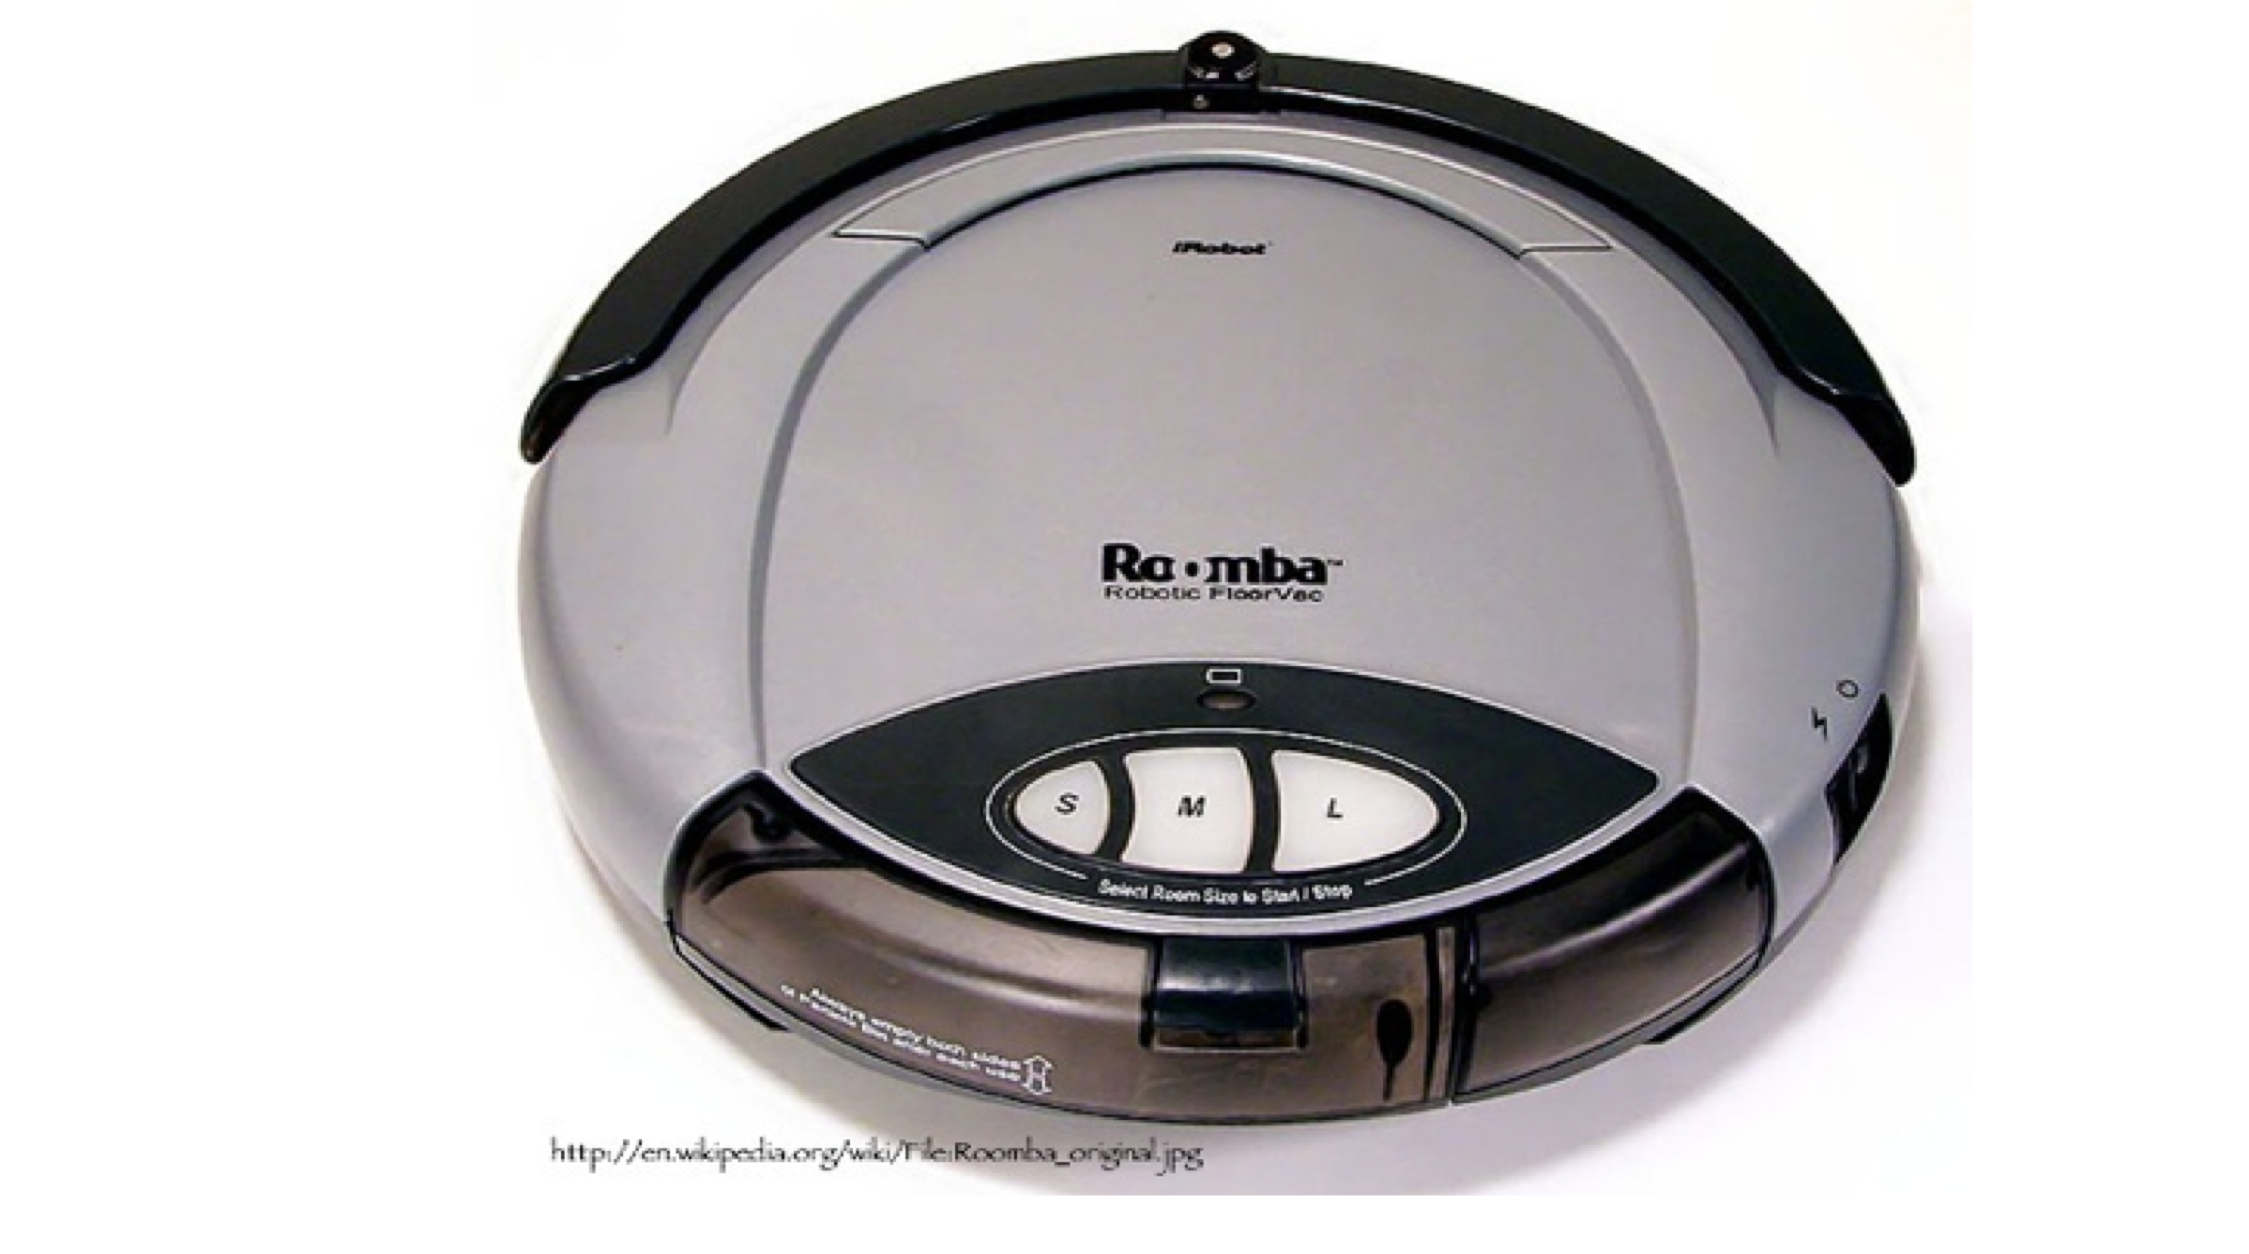 ../../images/roomba-service1.jpg